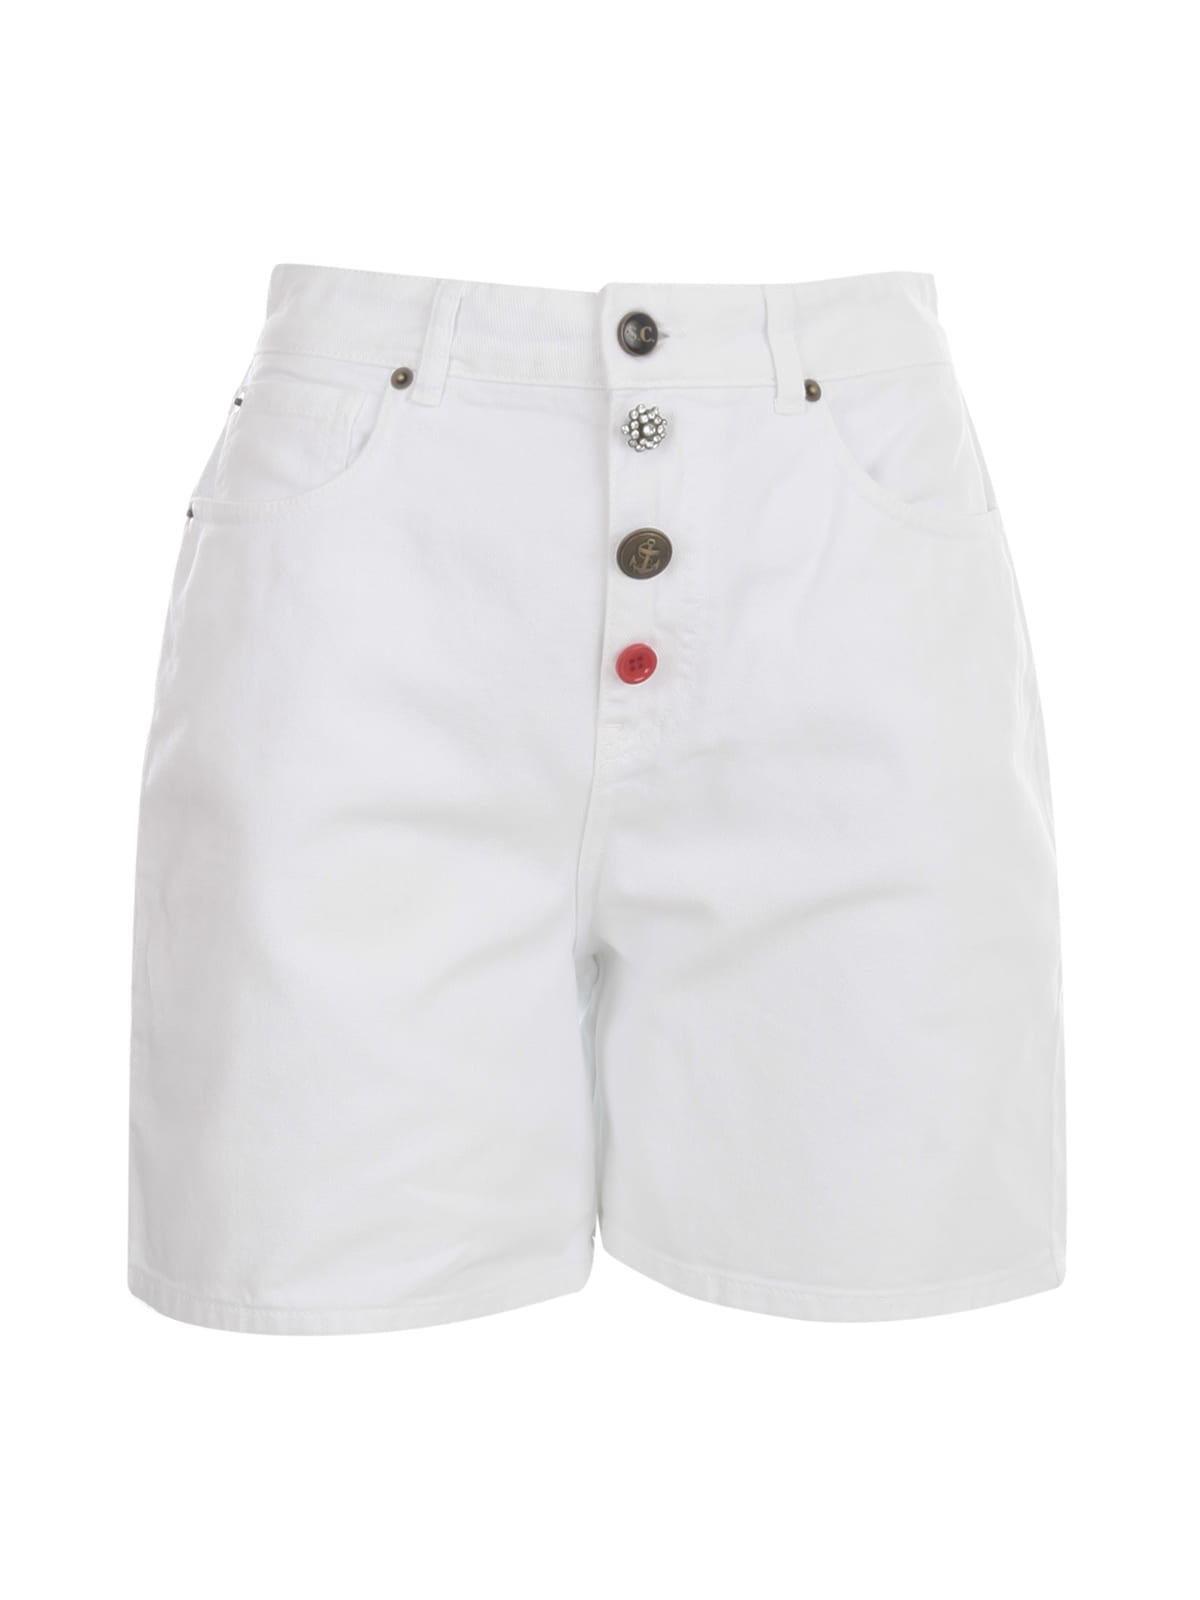 SEMICOUTURE AMBRE SHORTS,Y1SY03 A01 0 WHITE